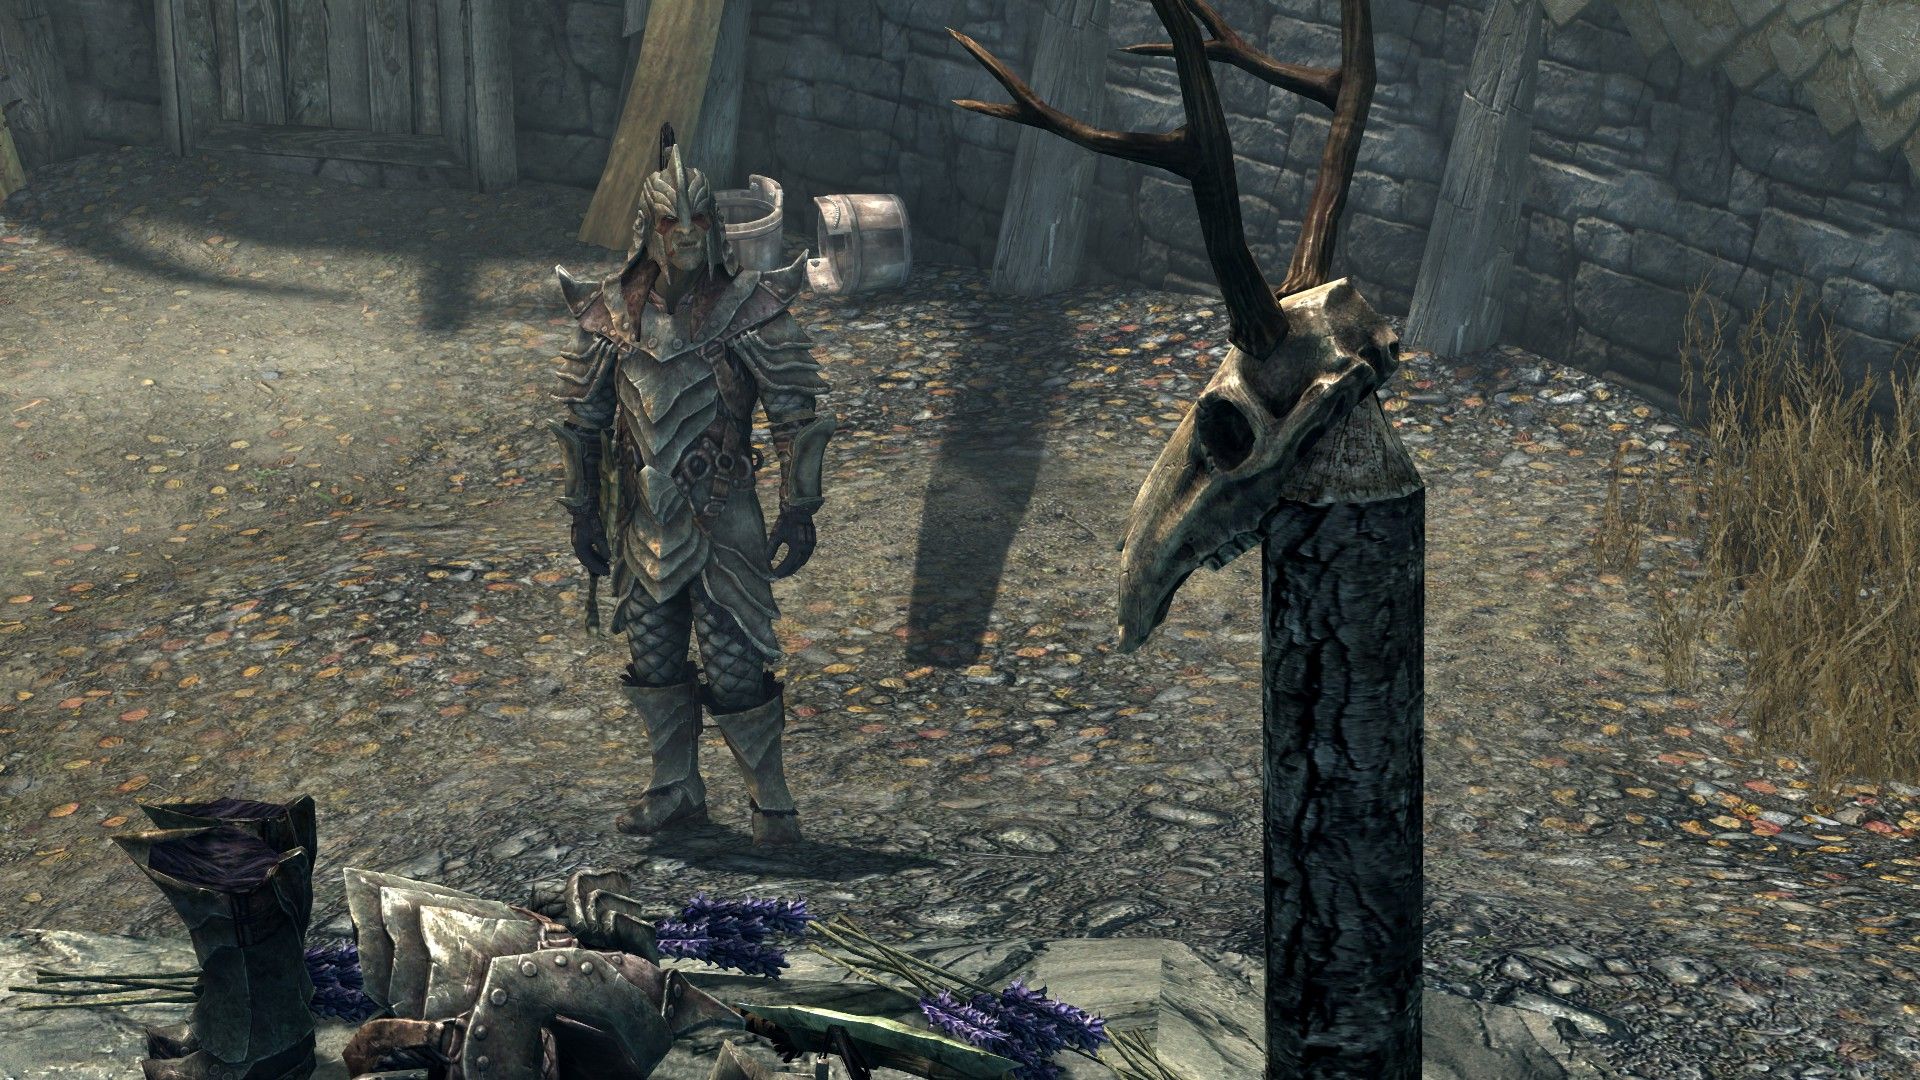 An orc in full armor stares at an animal skull that his god is speaking through.